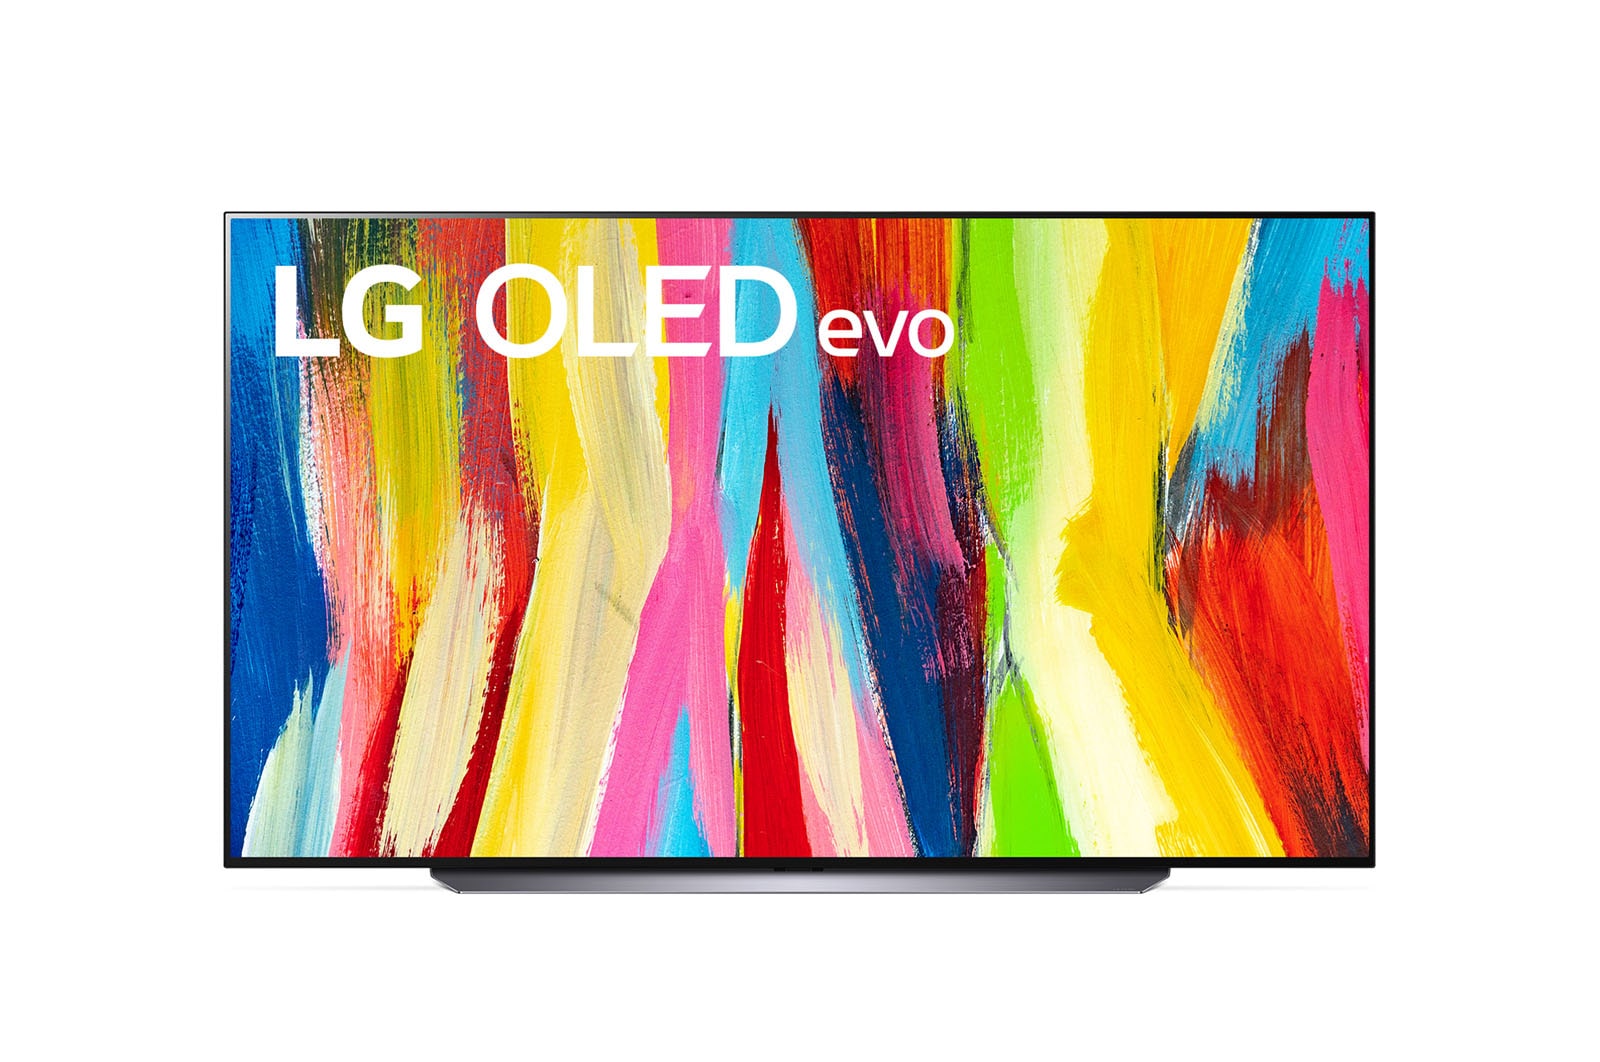 LG OLED evo TV 83 Inch G2 Series, Gallery Design, flush-fit wall mount ,4K Cinema HDR webOS Smart ThinQ AI Pixel Dimming - OLED83C26LA